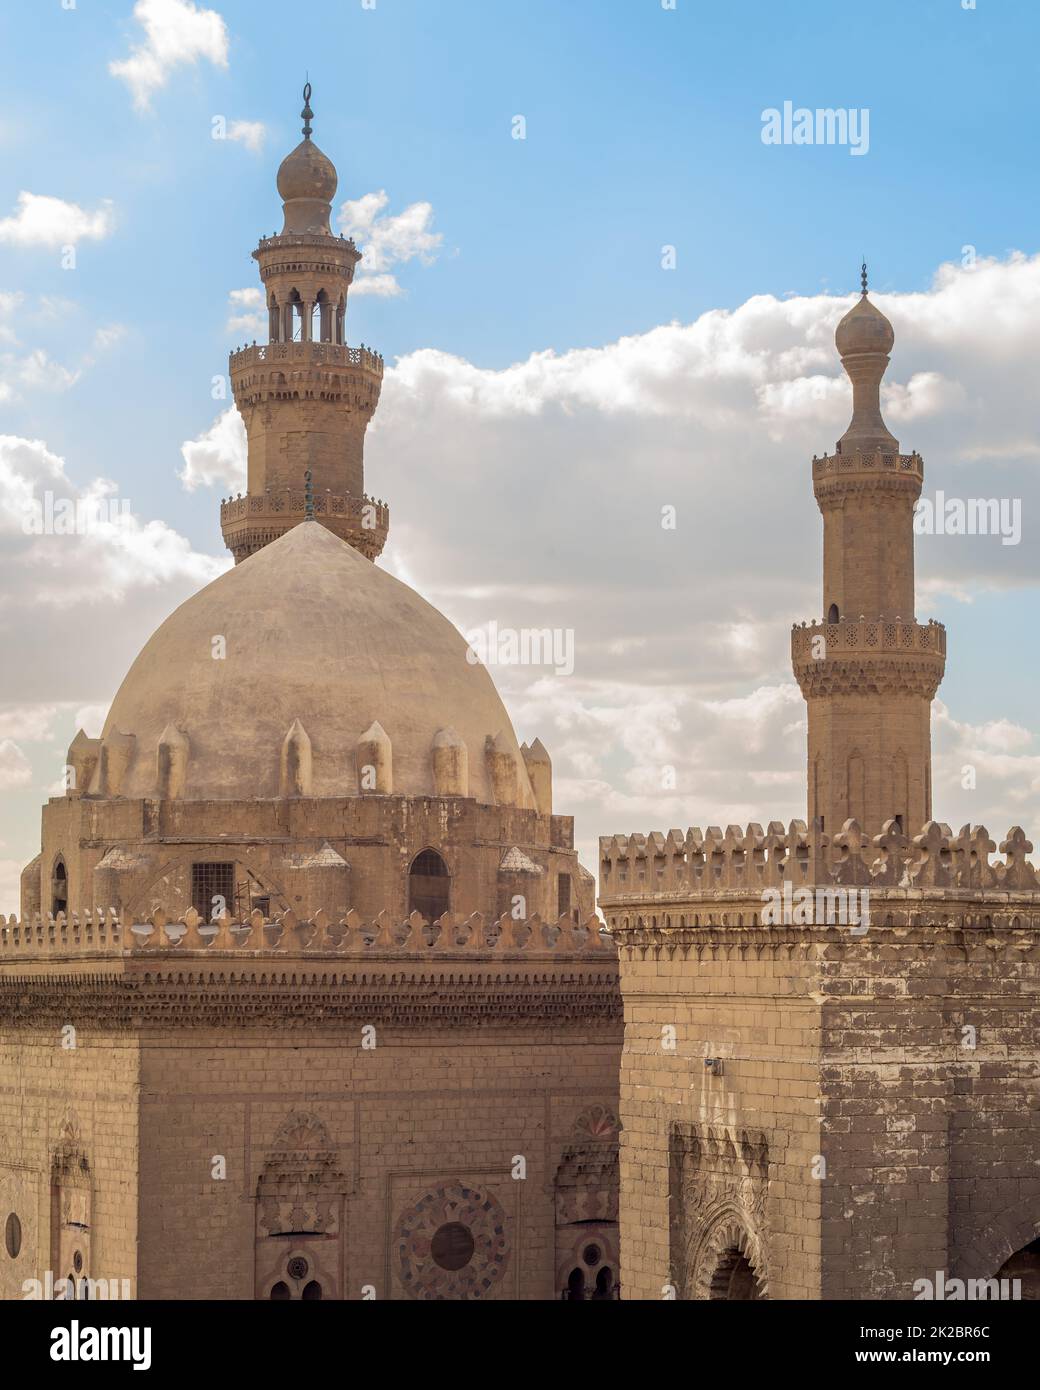 Minarets and domes of Sultan Hassan Mosque and Al Rifai Mosque, Cairo, Egypt Stock Photo